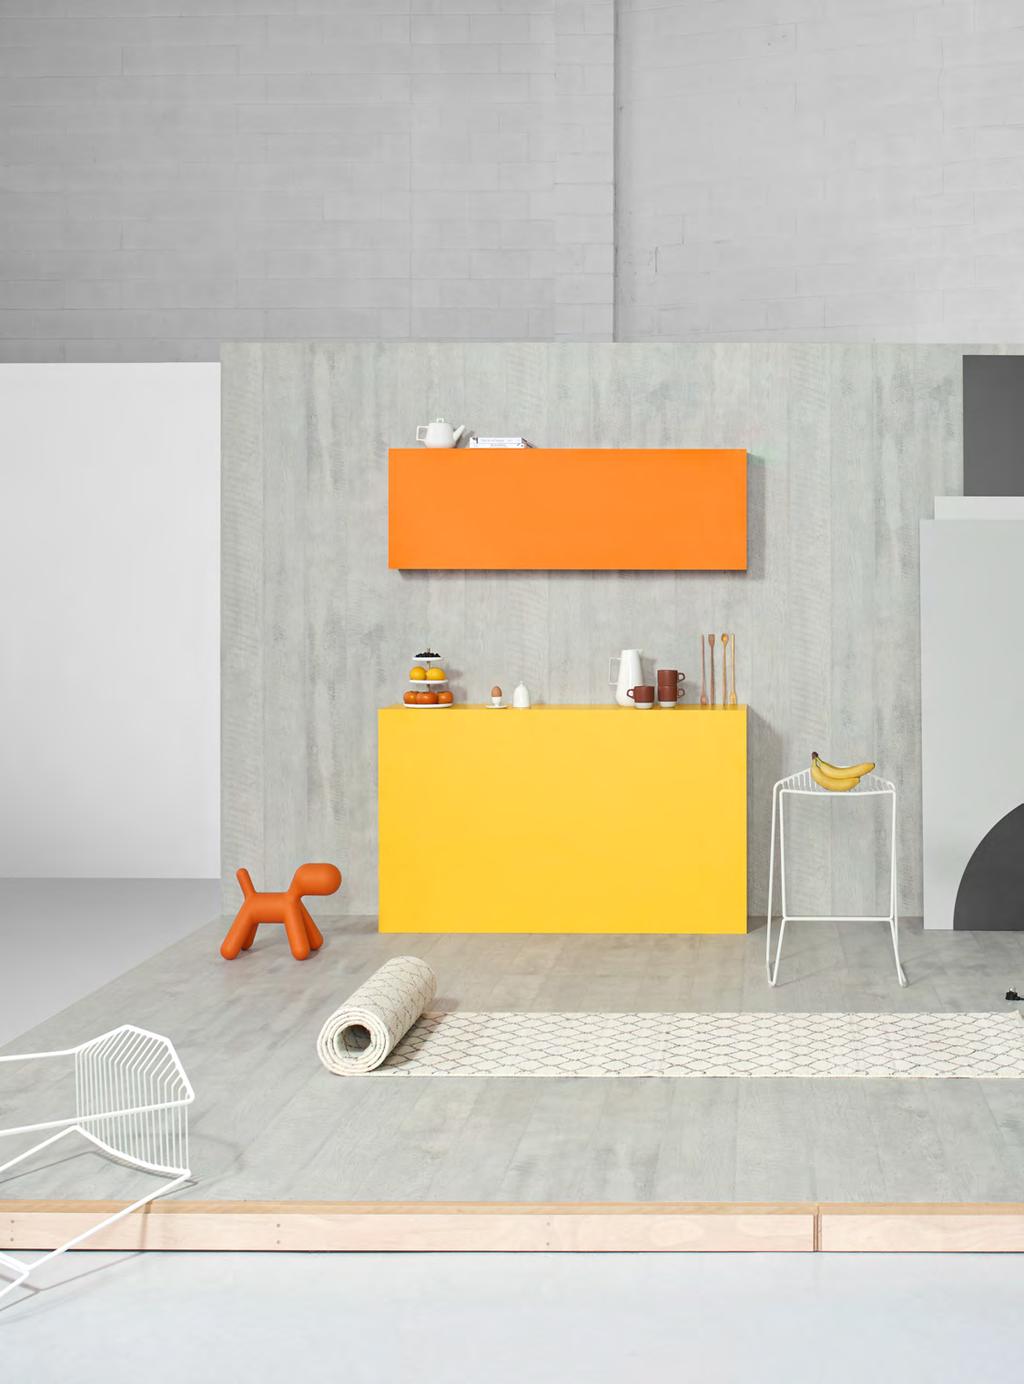 Industrial Elements & Bold Collection RAW MATERIAL INSPIRATION AND BOLD POPS OF COLOUR PROVIDE THE PERFECT INGREDIENTS